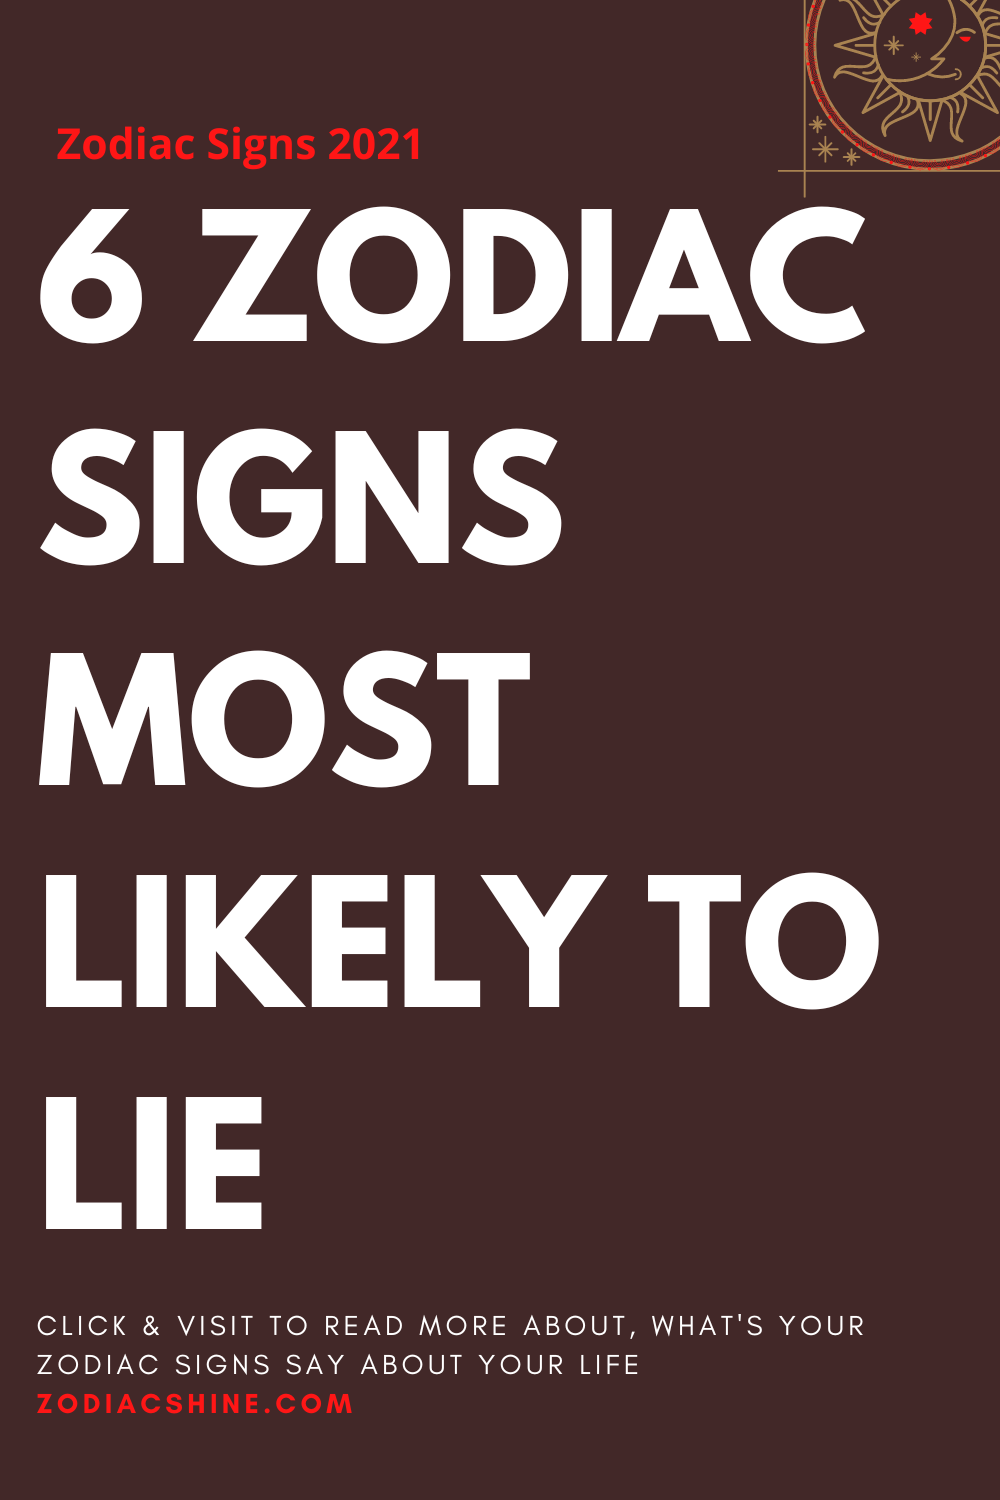 6 ZODIAC SIGNS MOST LIKELY TO LIE